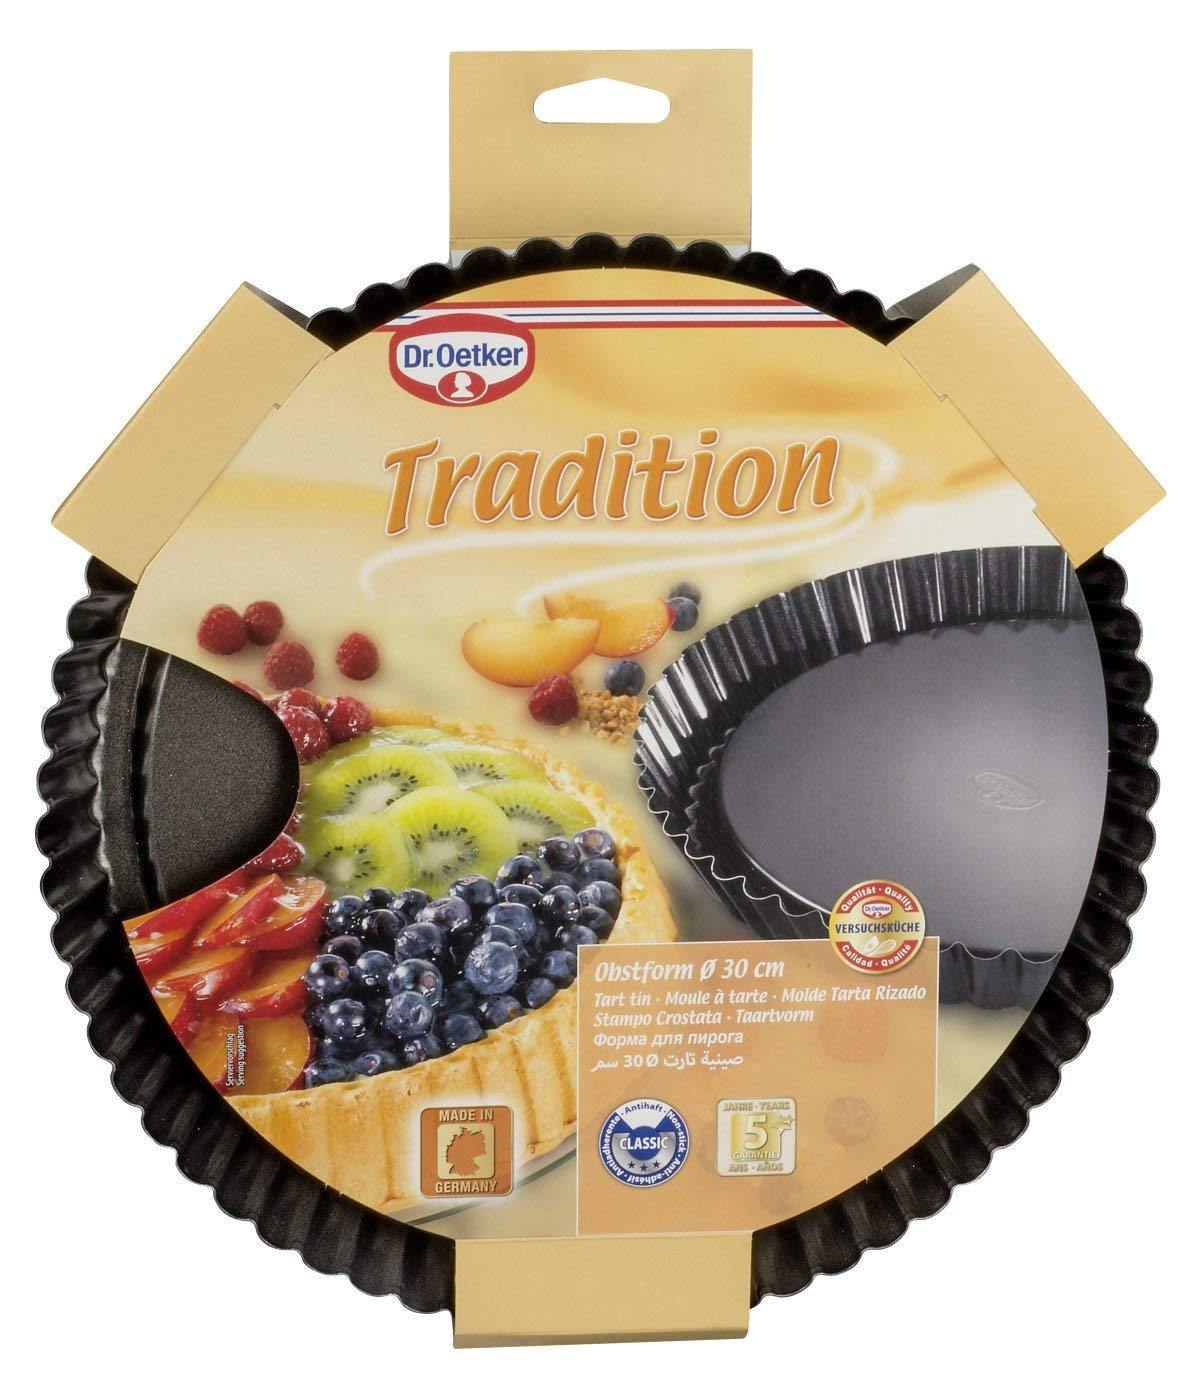 Dr. Oetker "Tradition" Fruit Cake Tin 30 cm - Whole and All